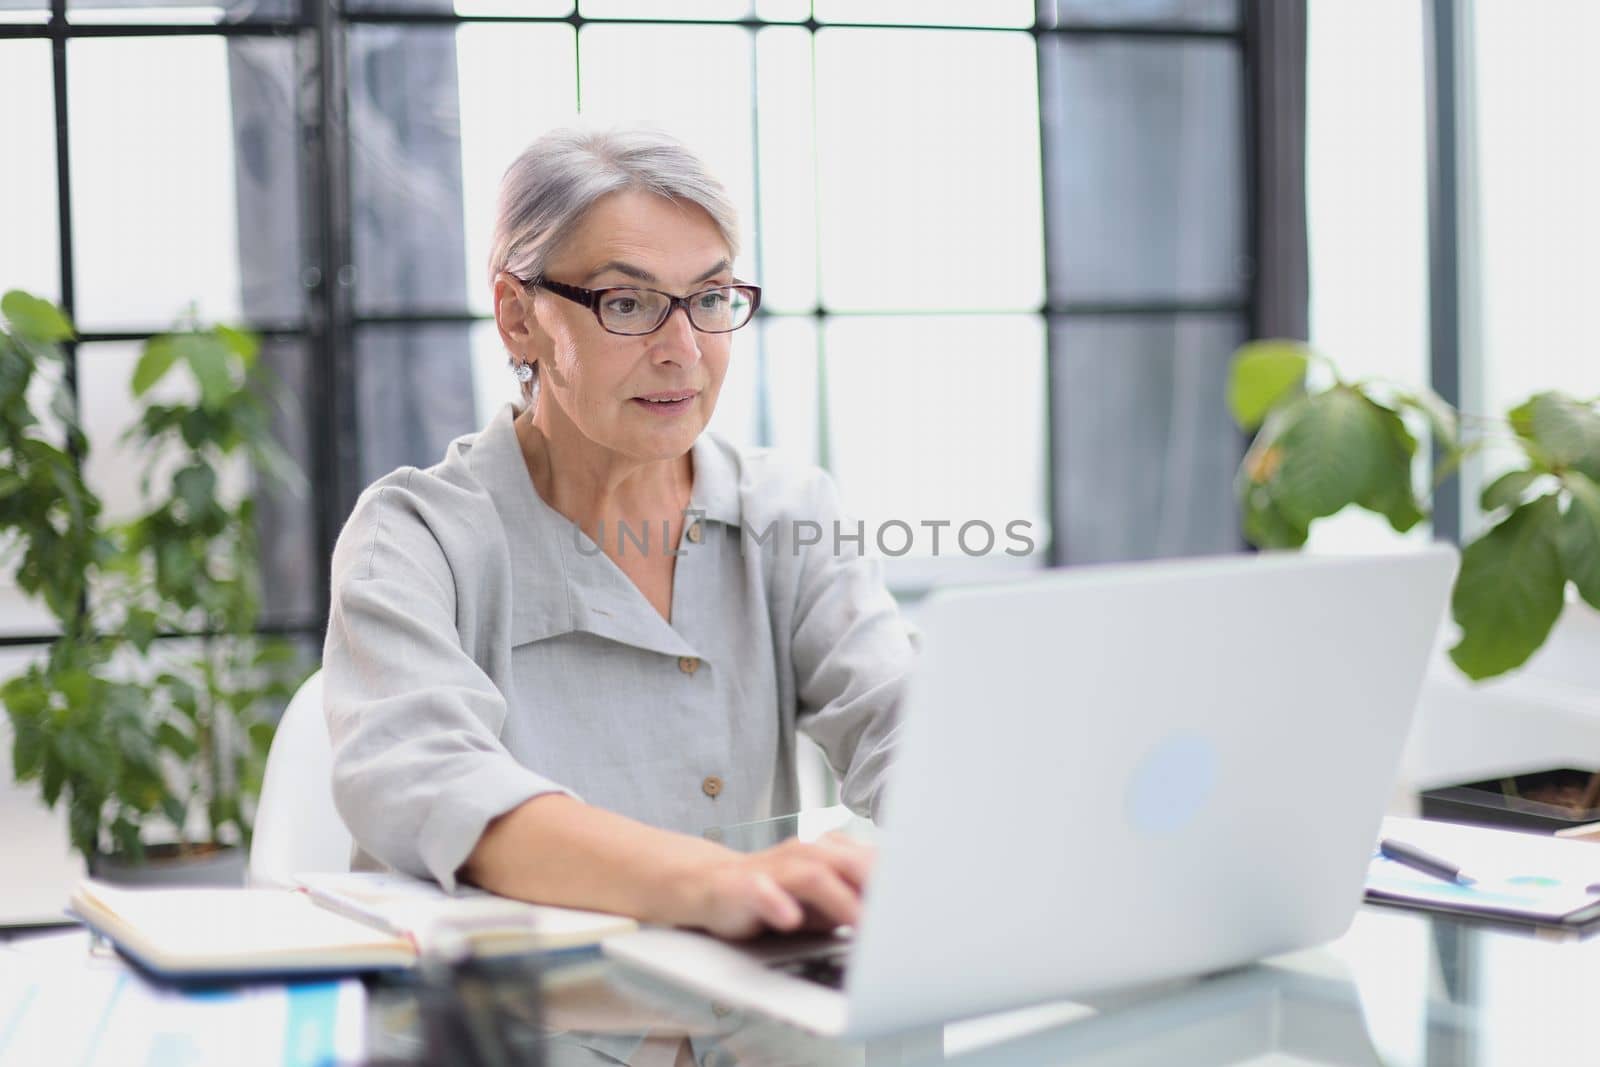 Stylish woman working with a laptop in the office.